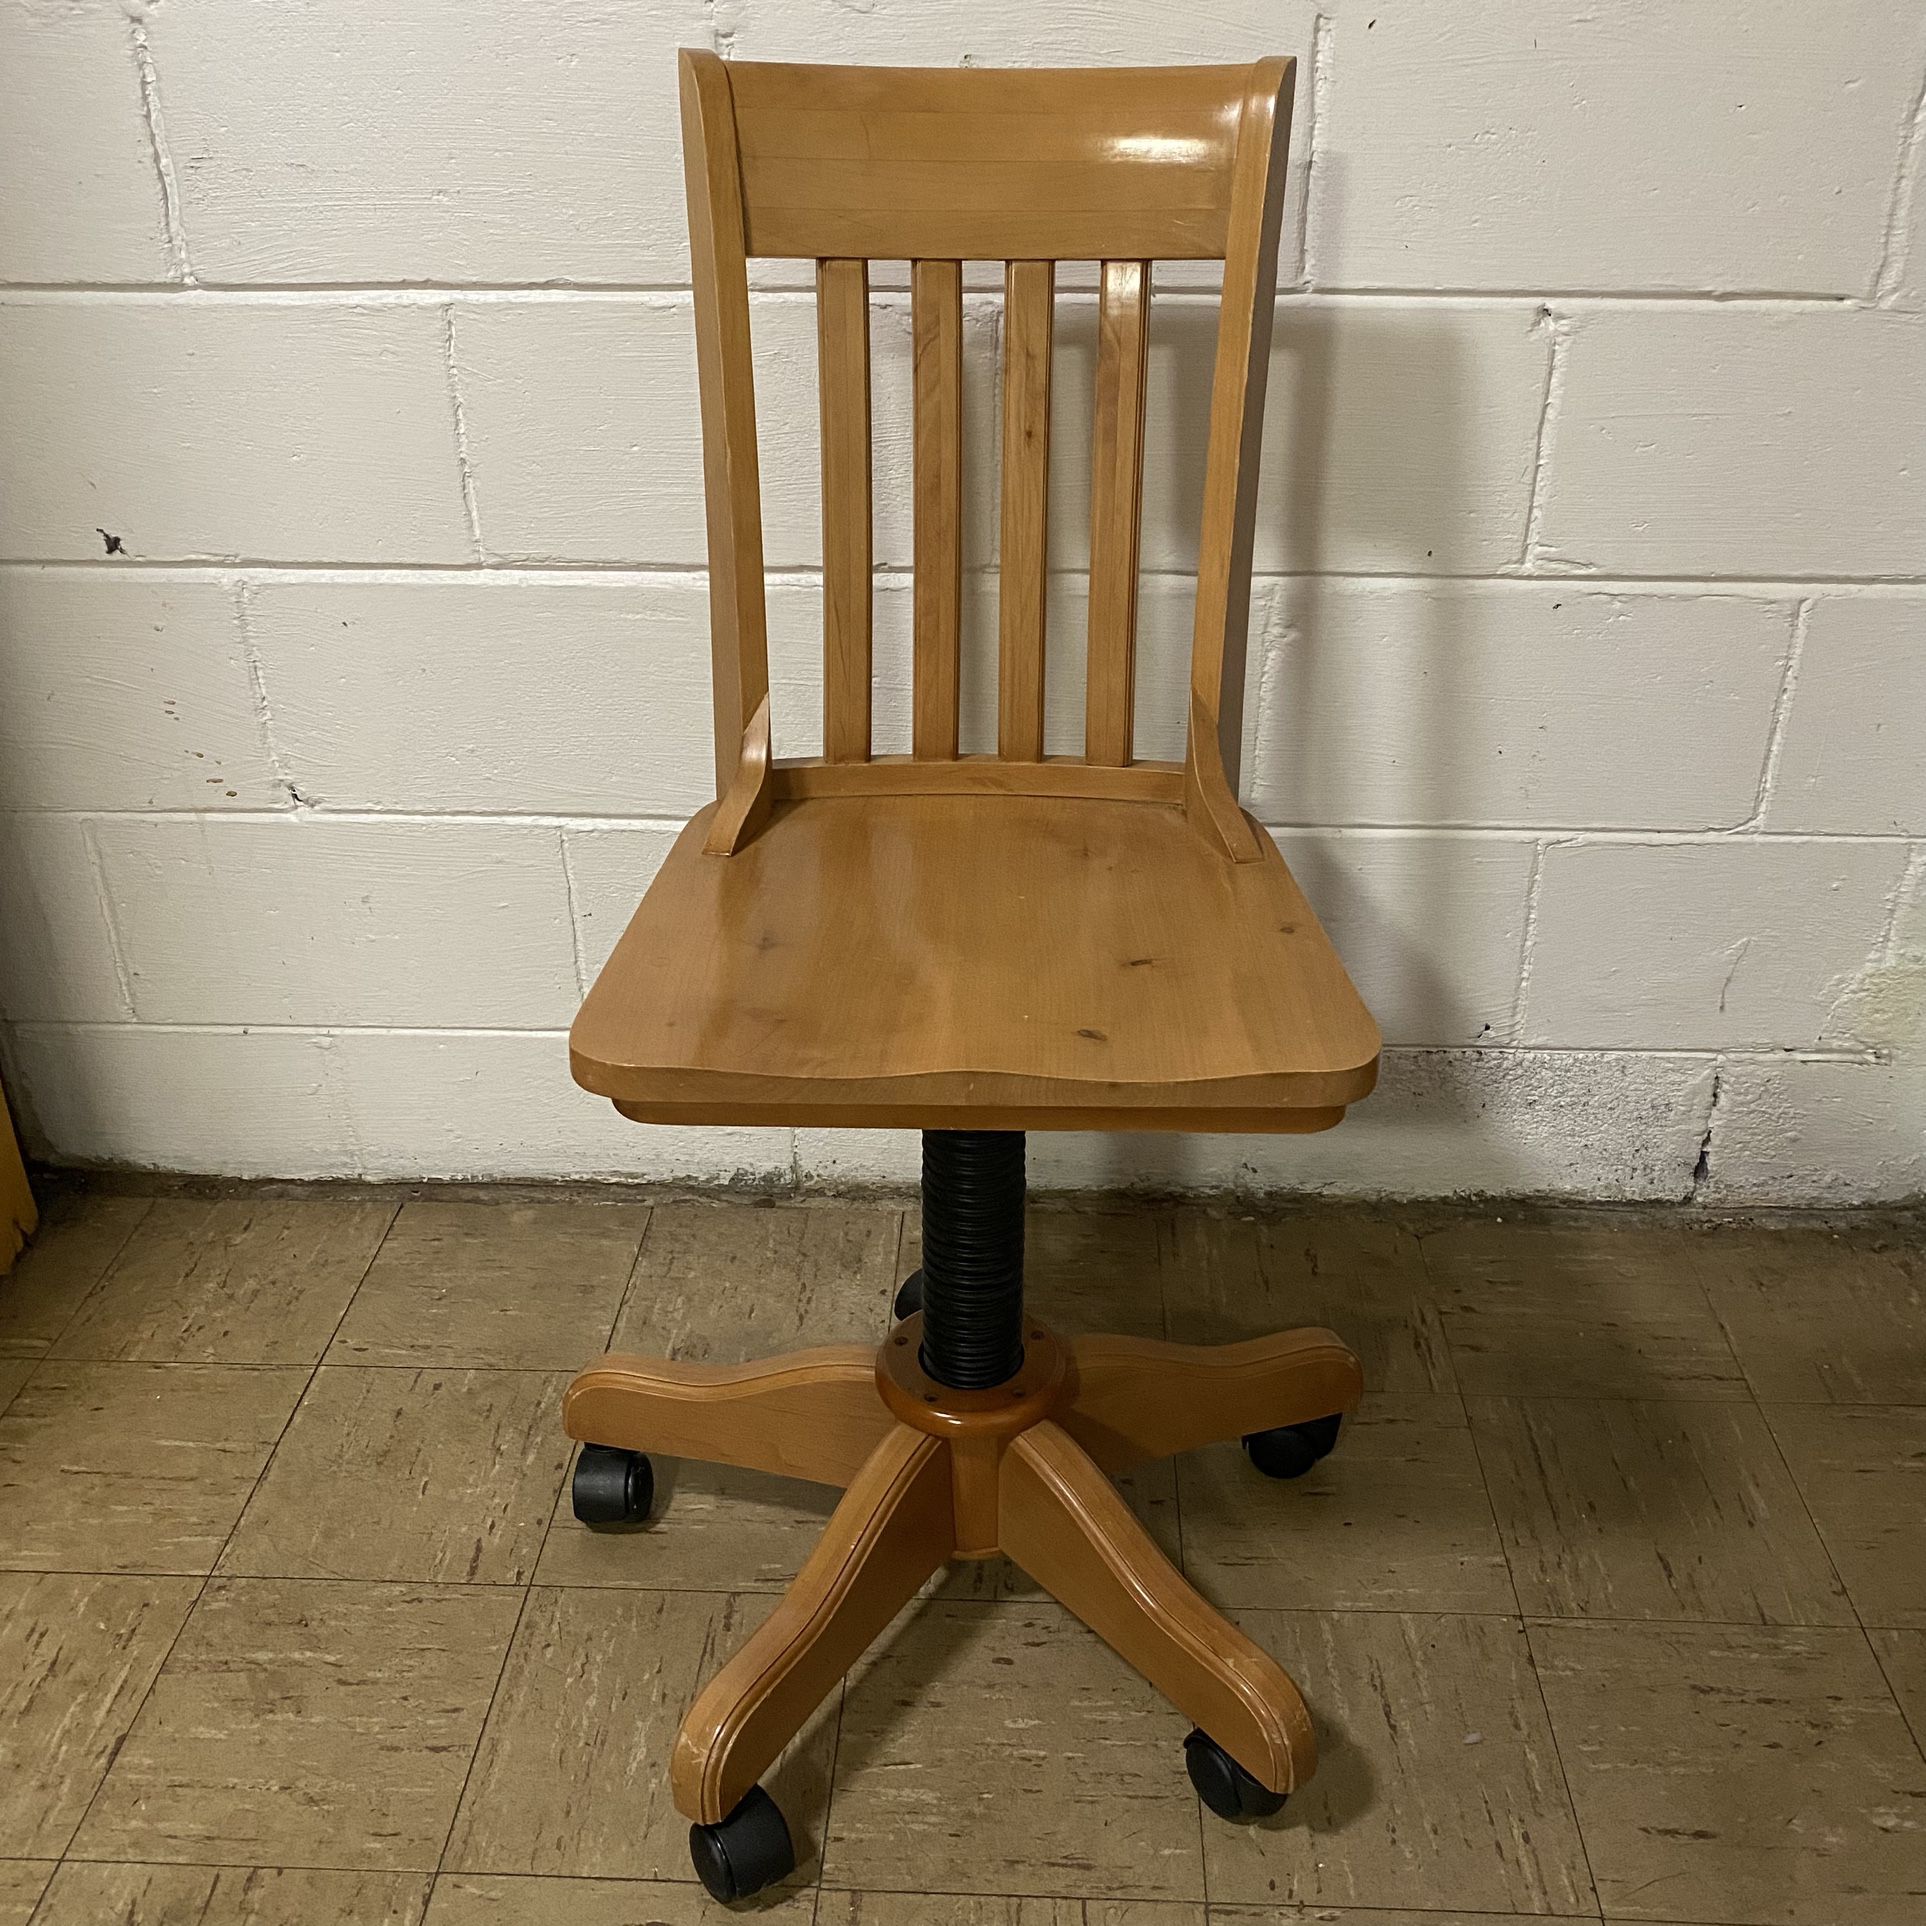 Vintage Solid Wood Swivel Office Chair with Adjustable Height  Great pre-owned condition.   Brand: Bombay Kids (even though it fits an adult)  Pick up